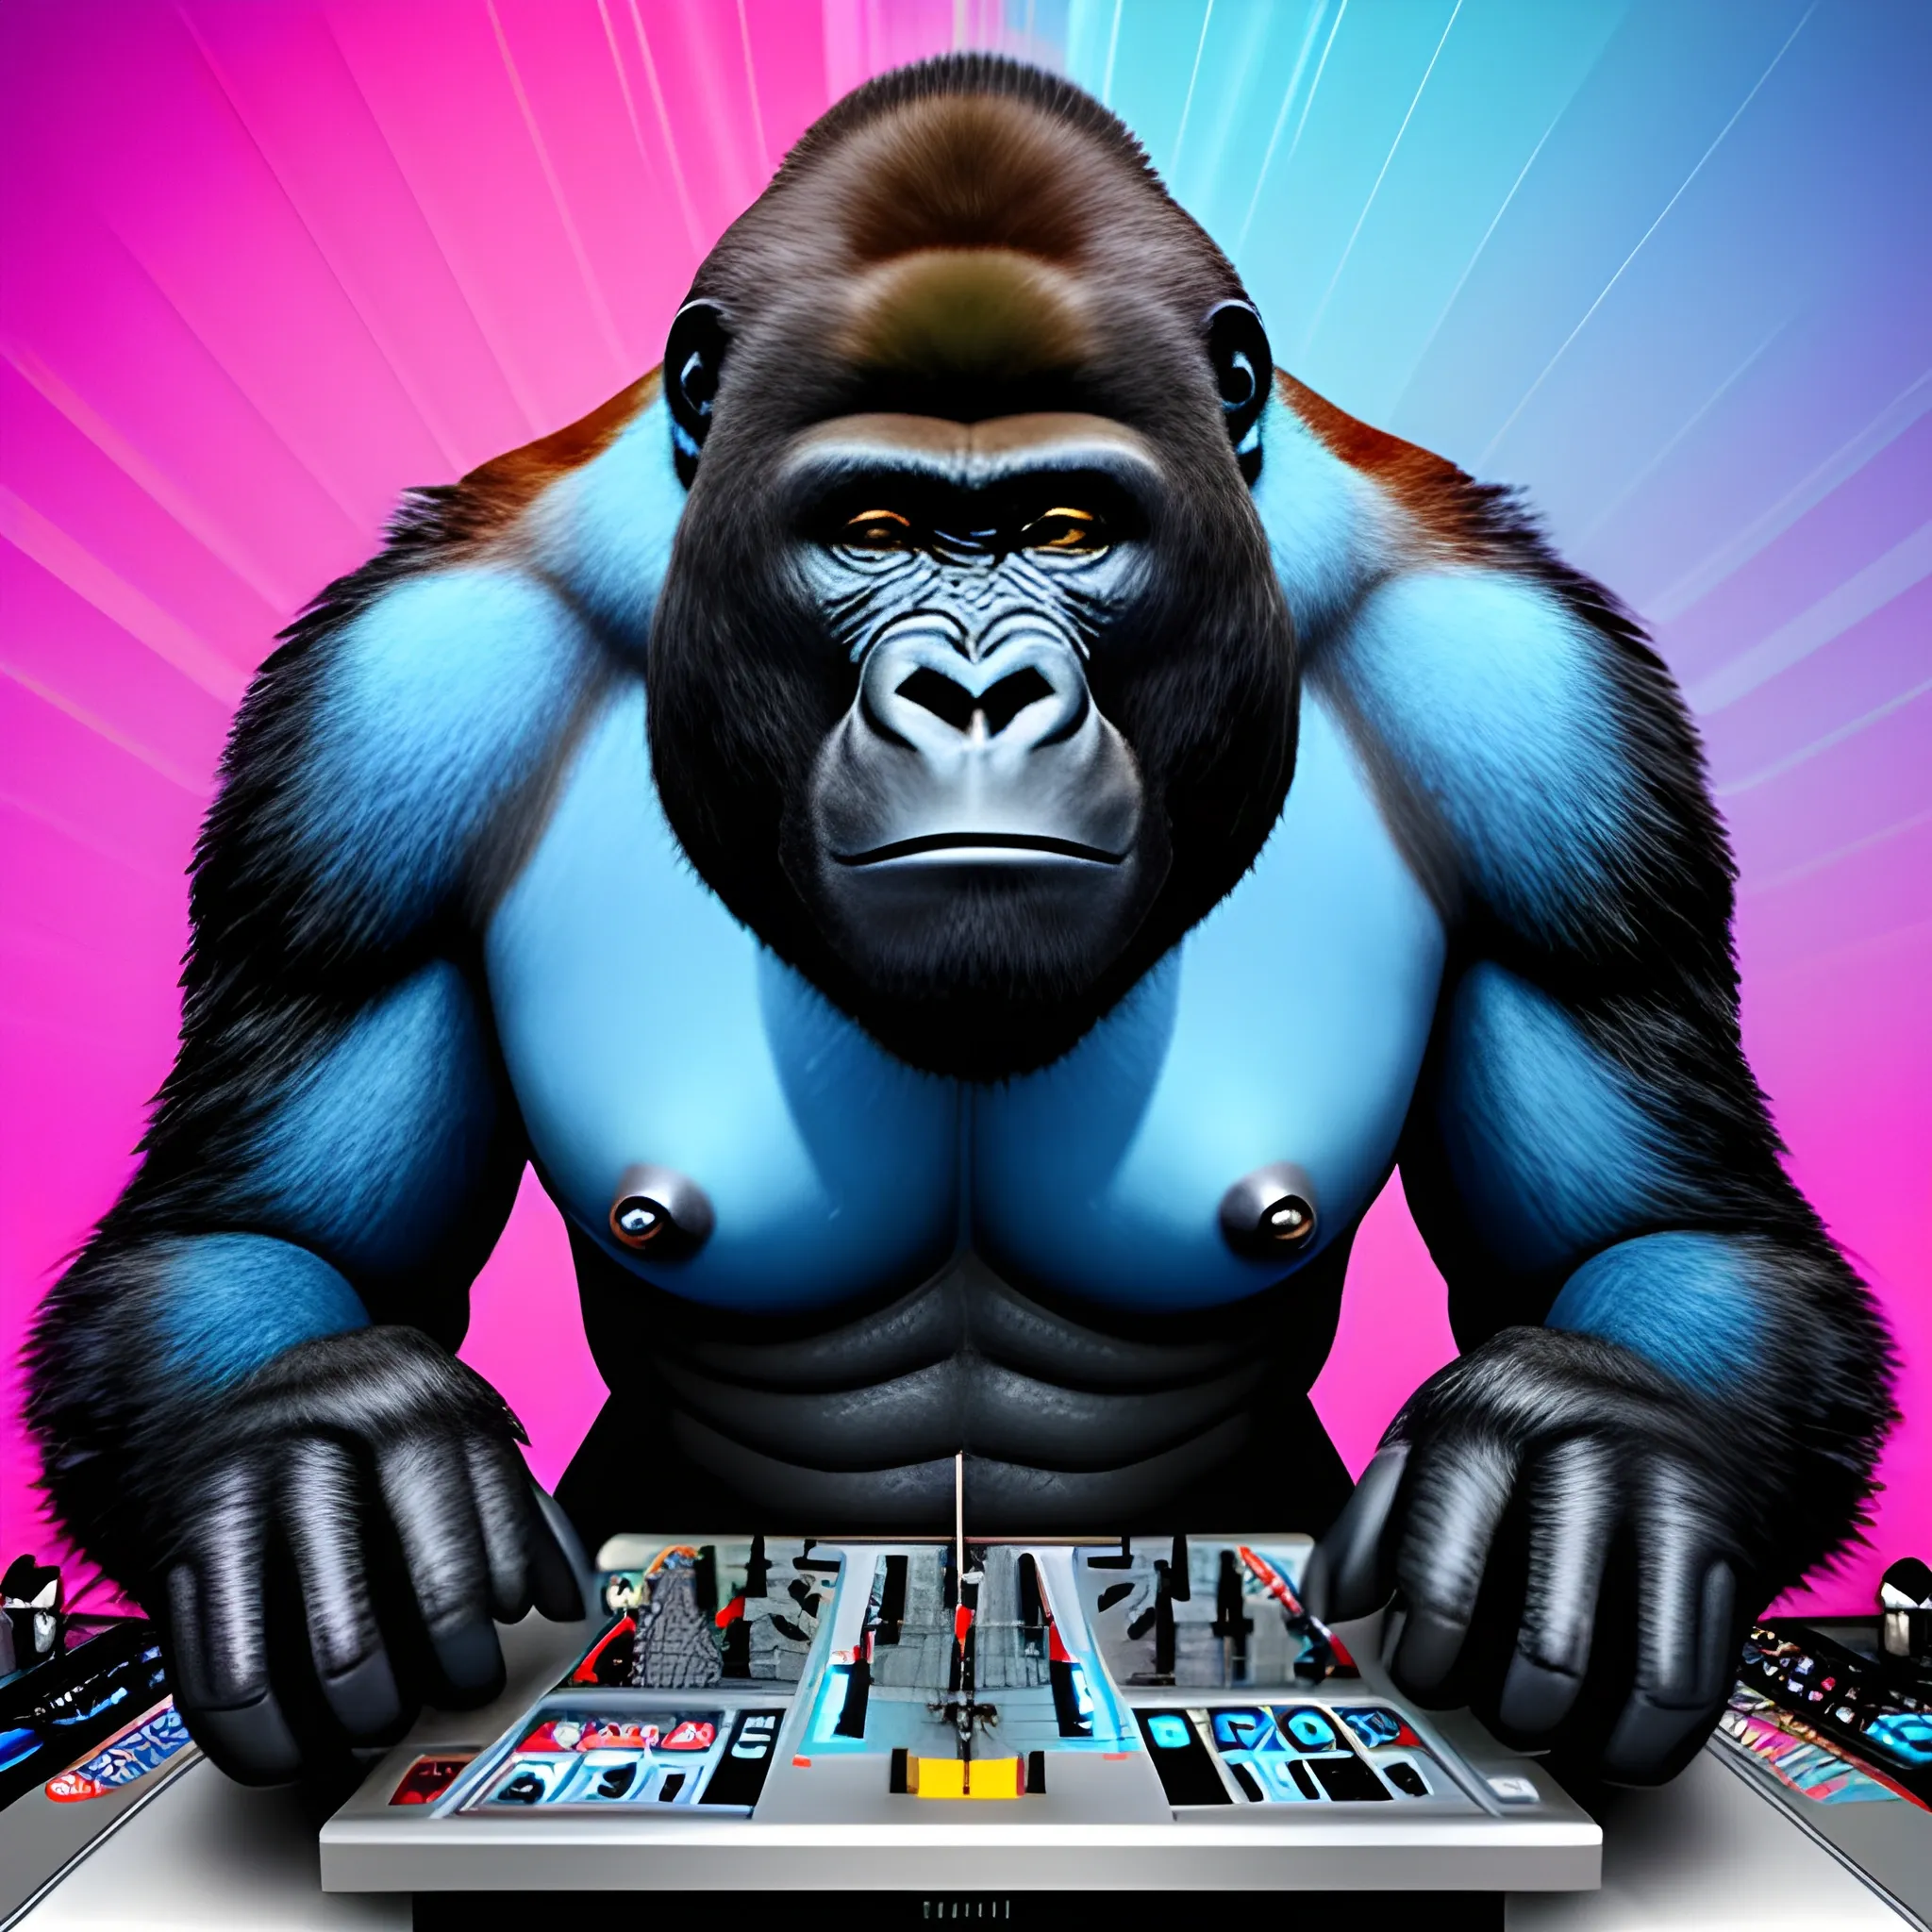 happy Gorilla dj speaking into the microphonegiving a packed show, runway full of people, set of speakers playing, blue lights, Cartoon